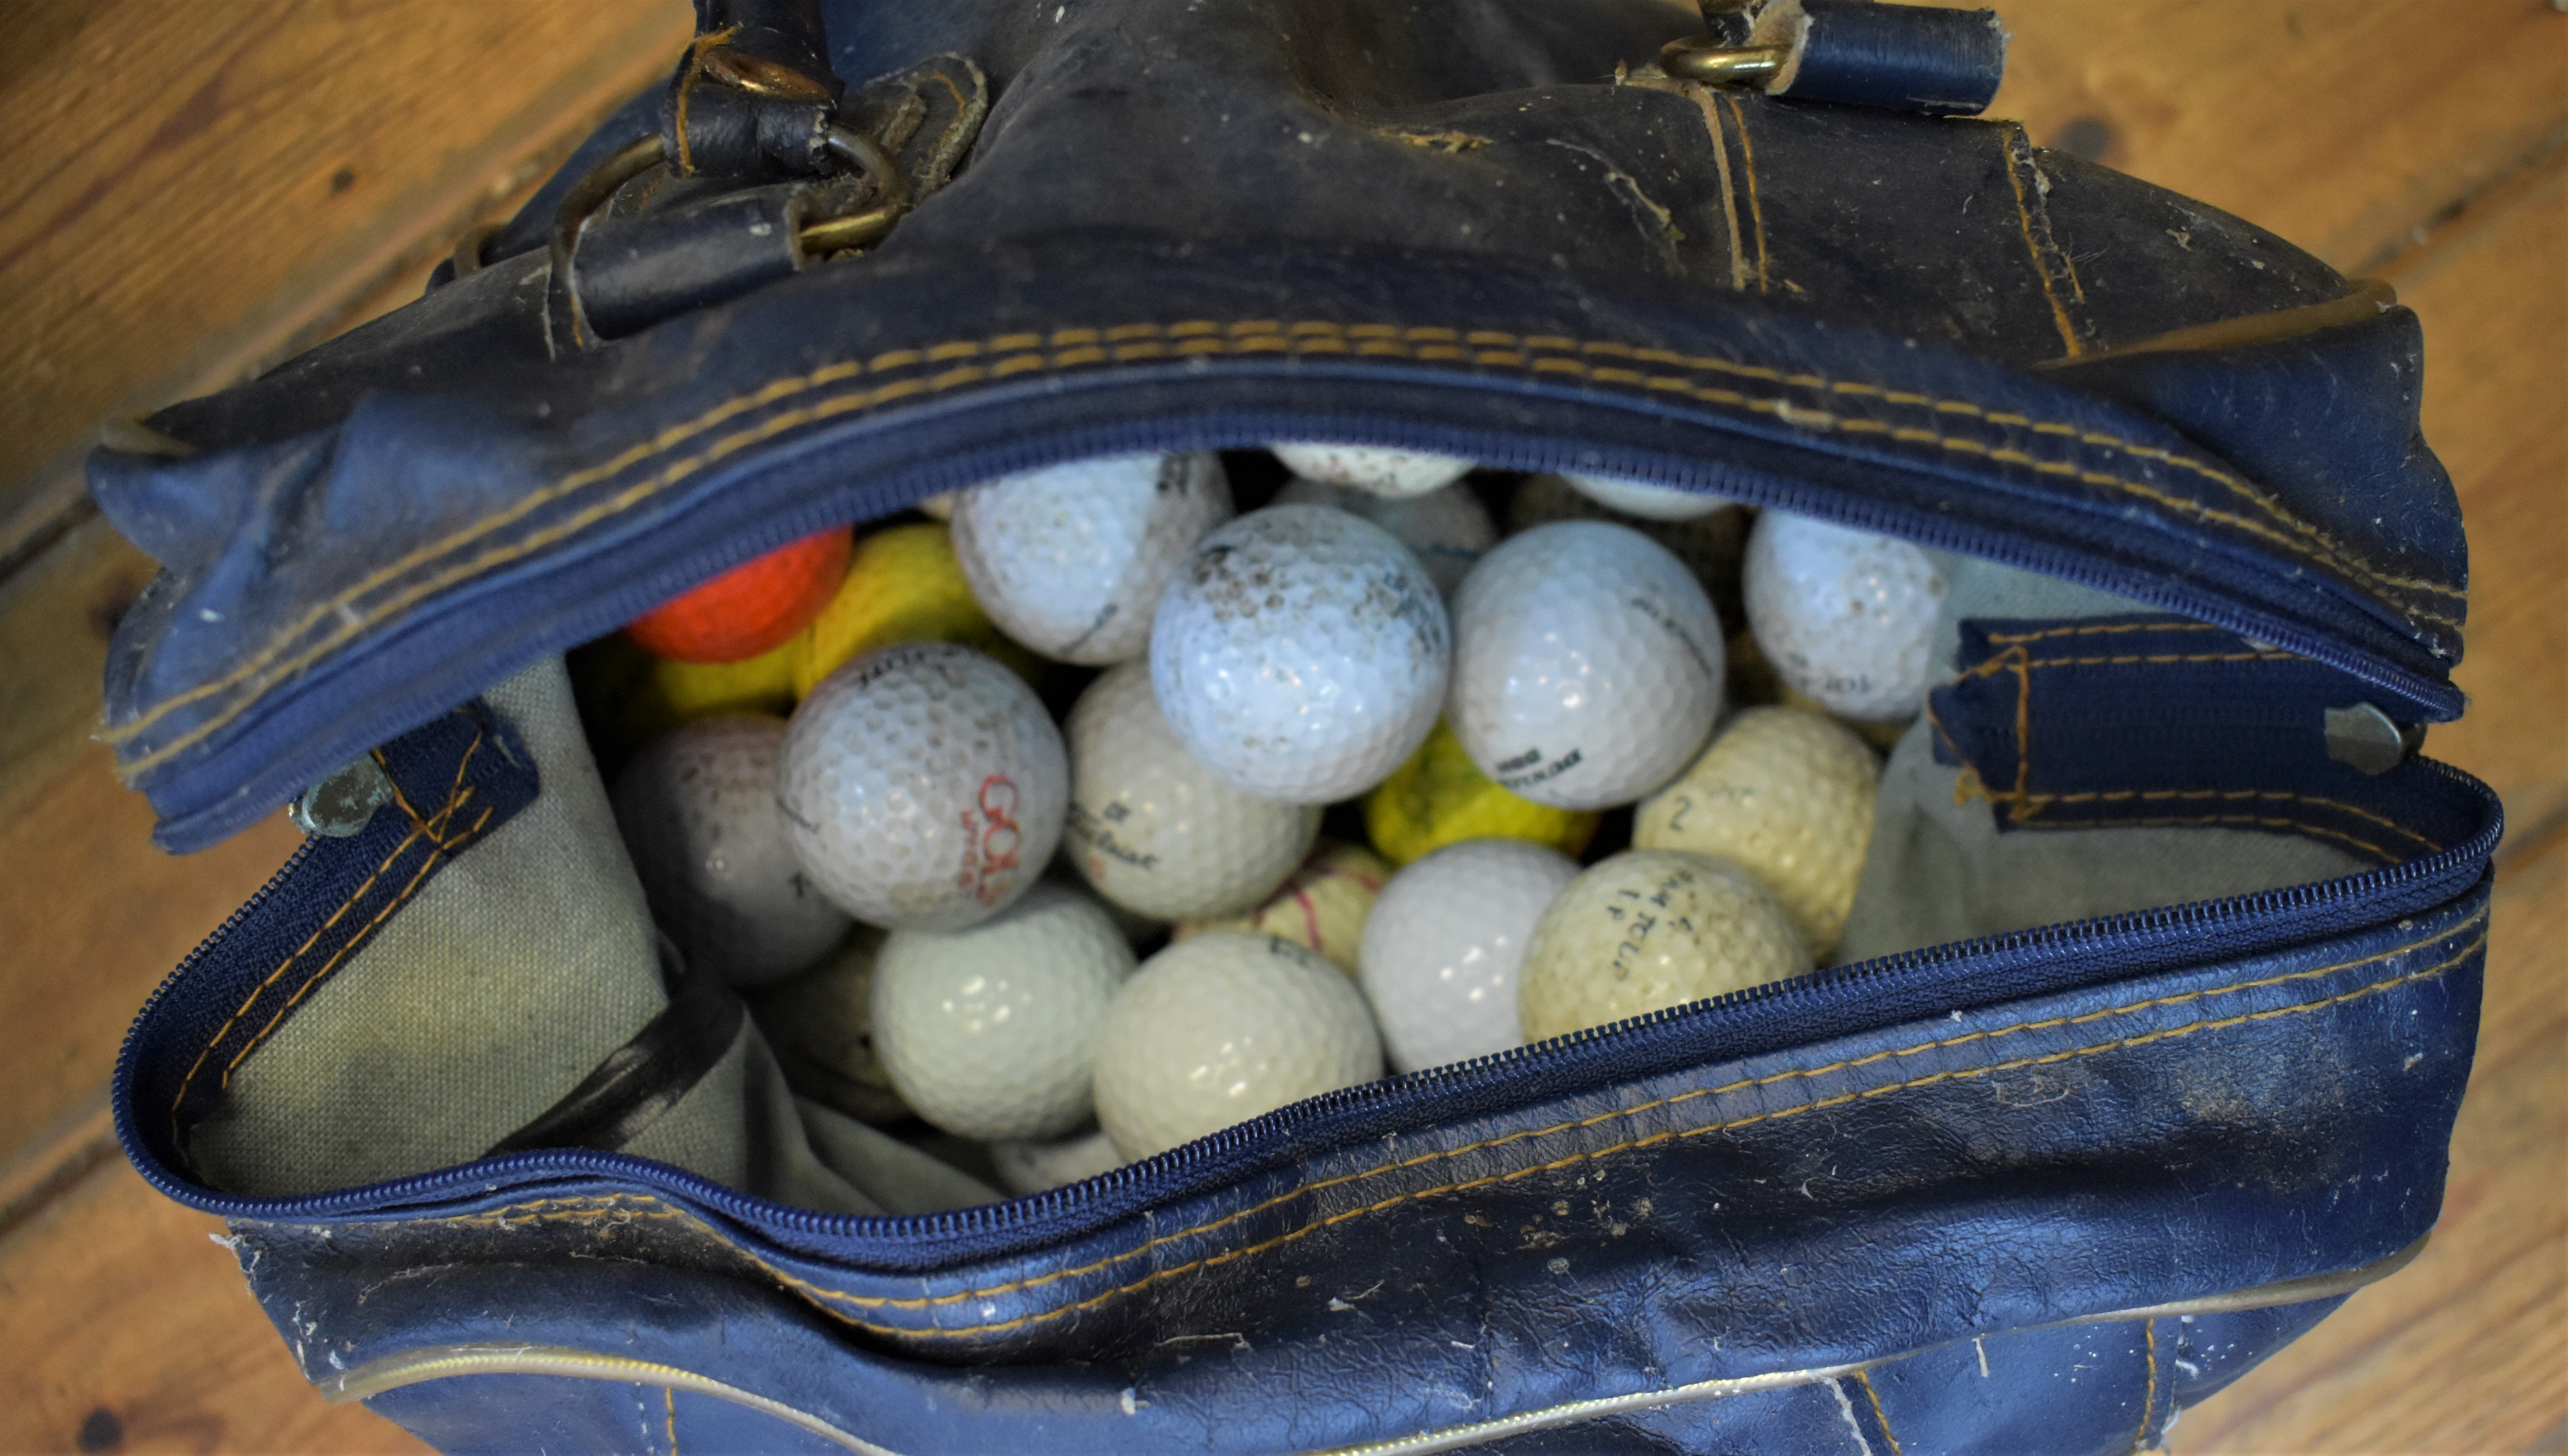 A nice pair of carry cases filled with used golf balls. Nice used condition